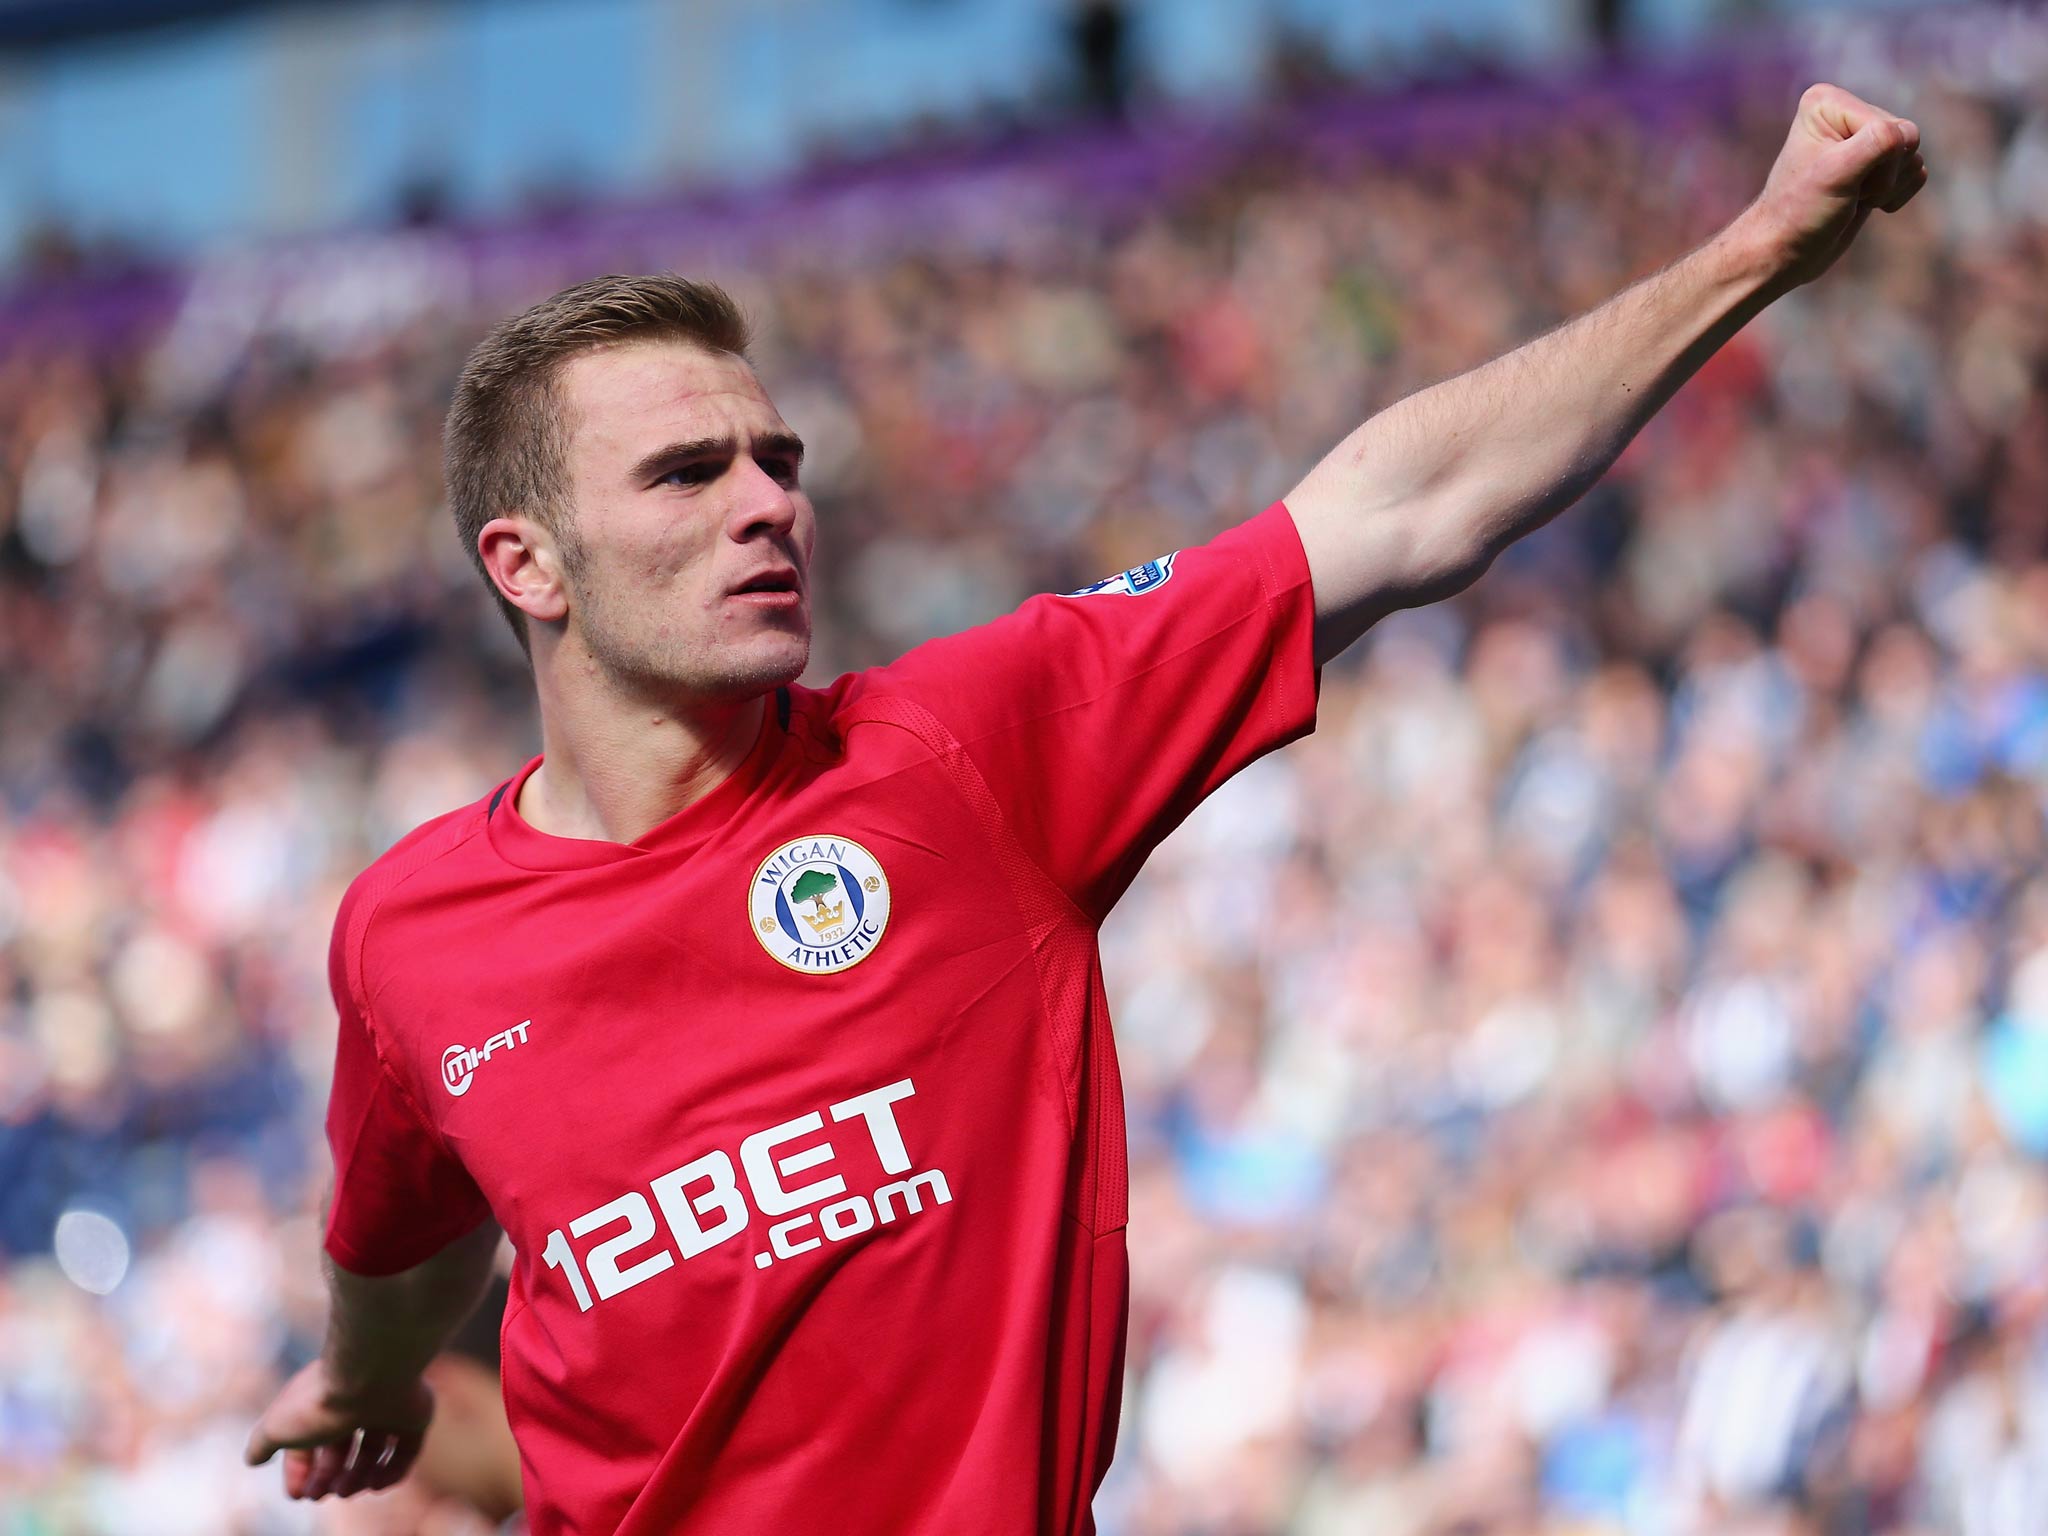 Callum McManaman has joined West Brom